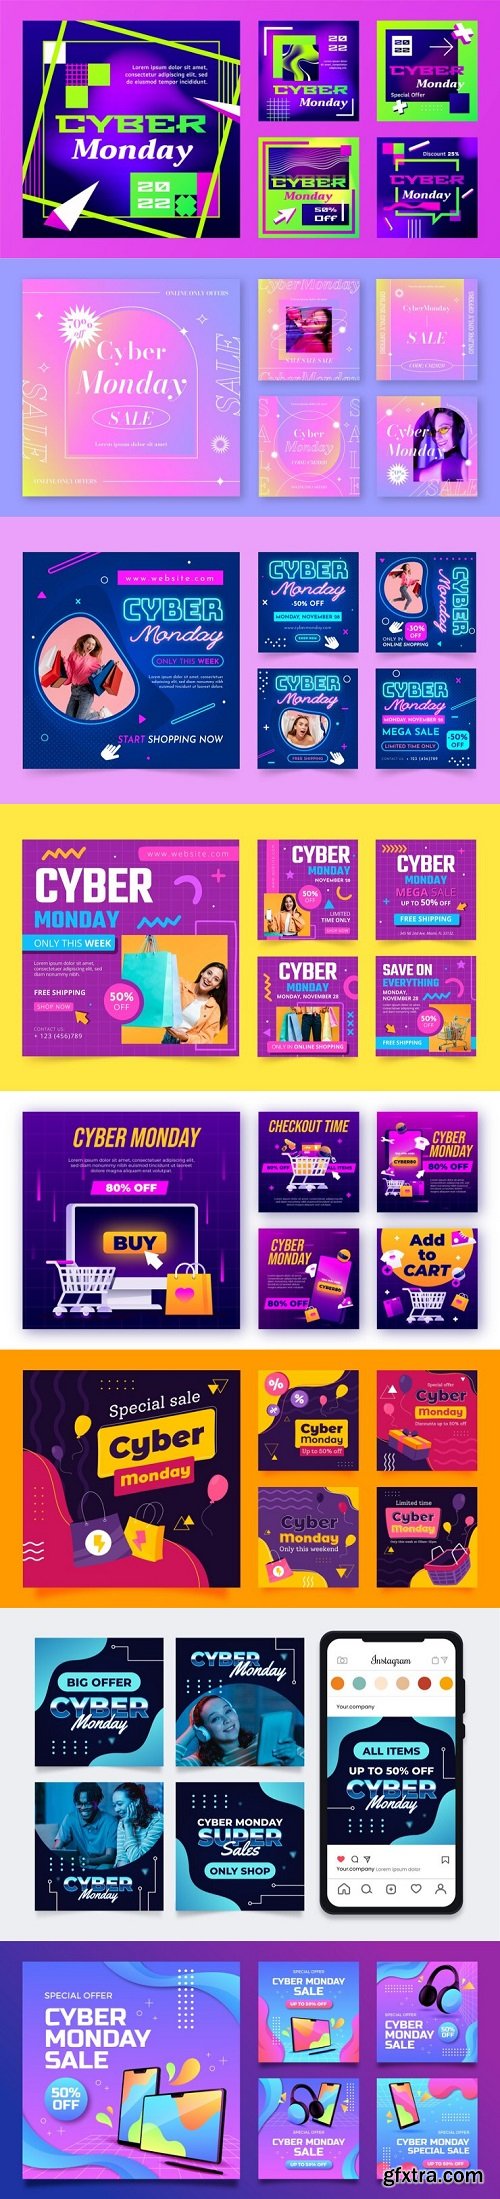 Instagram posts collection for cyber monday